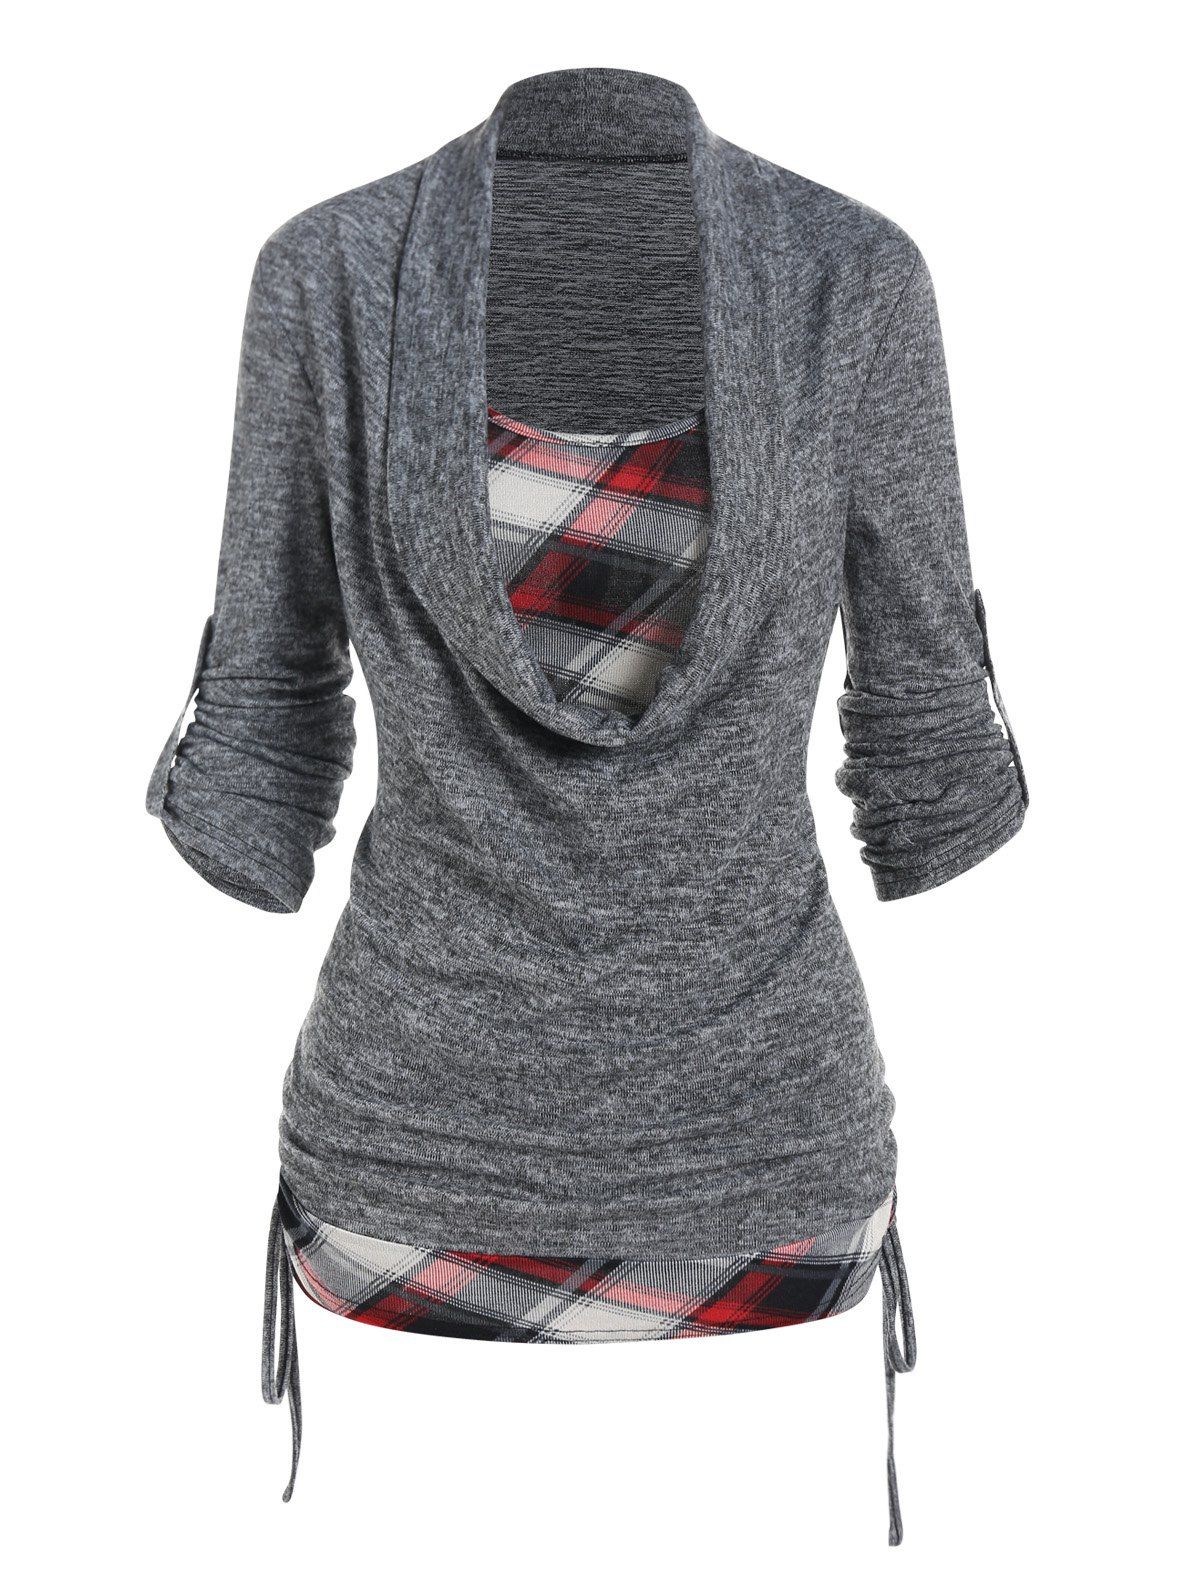 Plaid Print Knit Faux Twinset T Shirt Space Dye Cinched Cowl Collar Knitted T-shirt Rolled Up Sleeve Casual 2-In-1 Tee - DARK GRAY XXXL